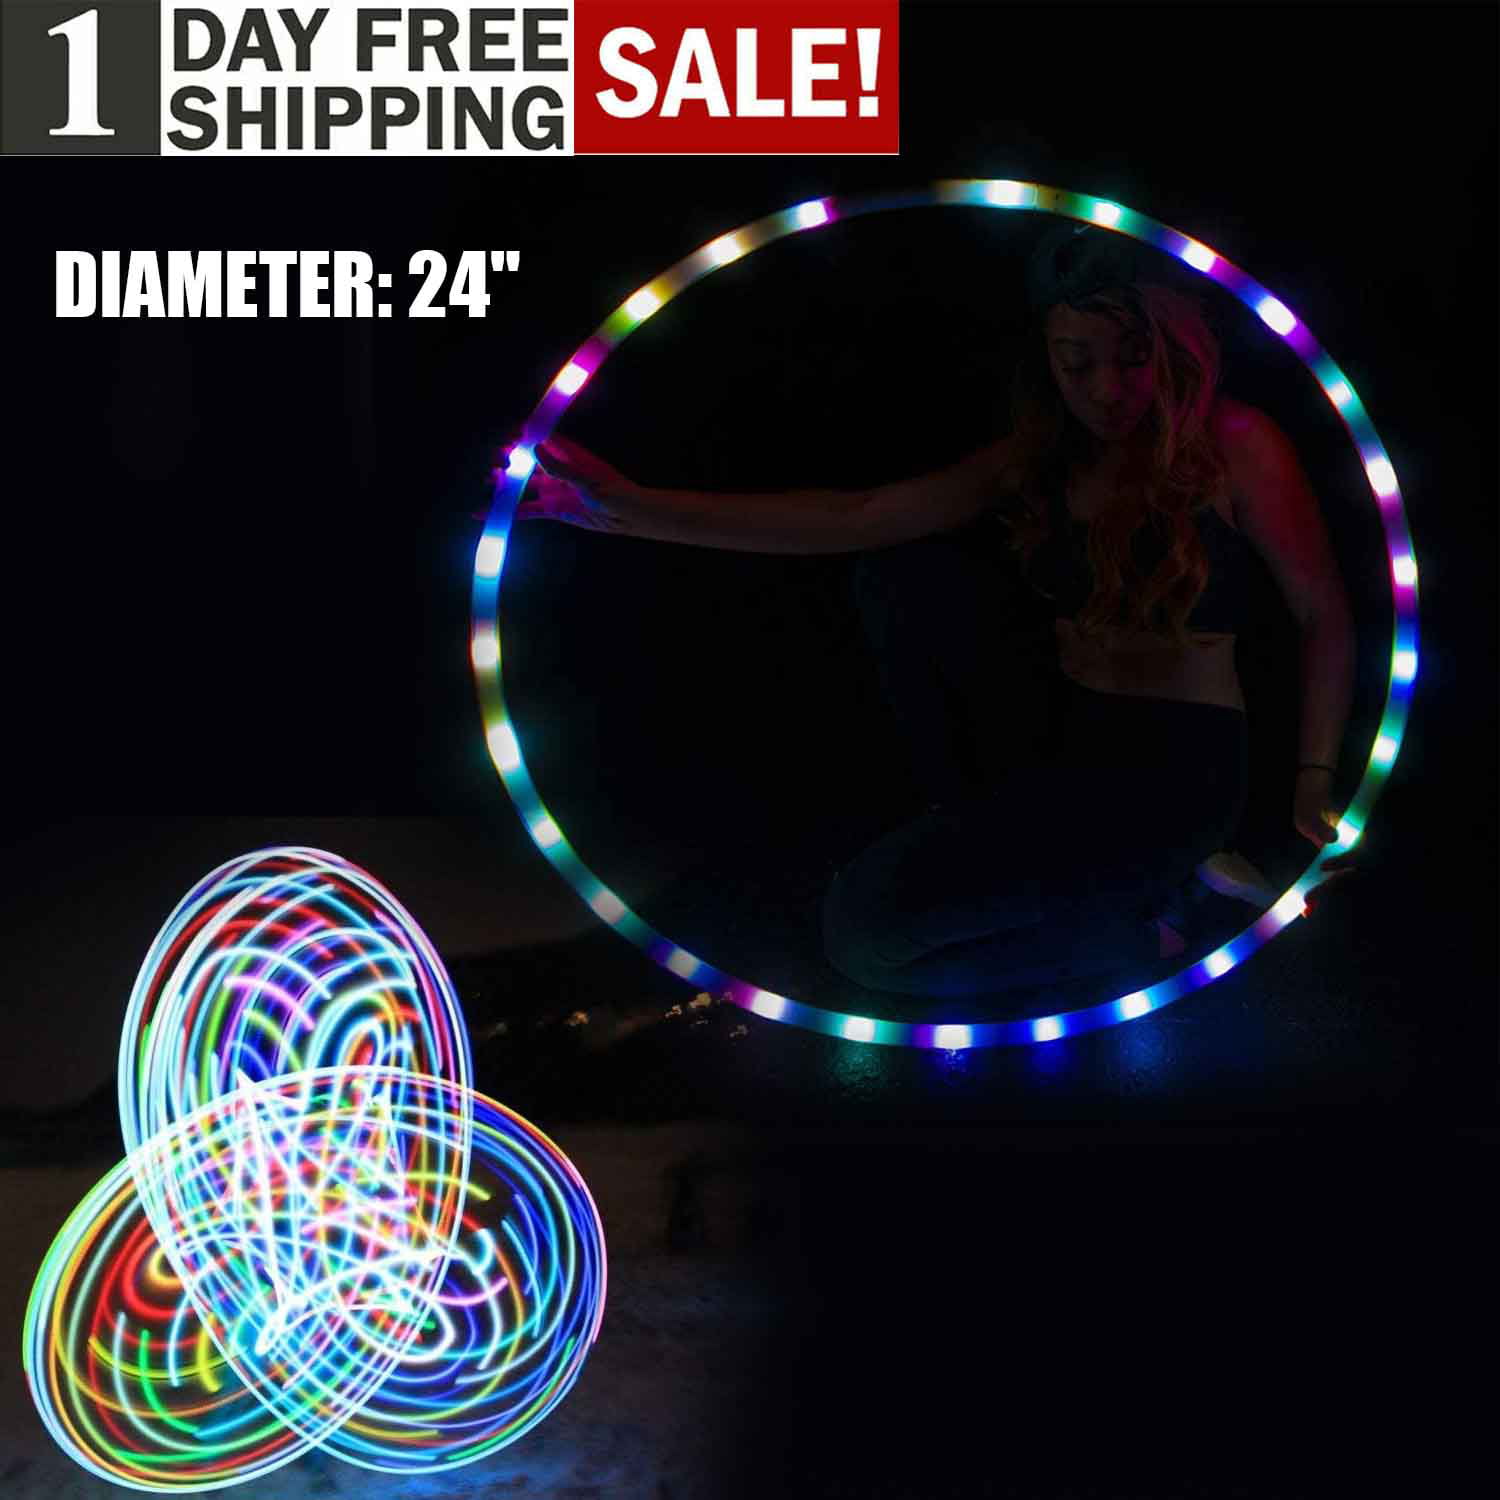 LED Flashing Circular Glow Up Fitness Weight Loss Colorful Fitness Hoop 